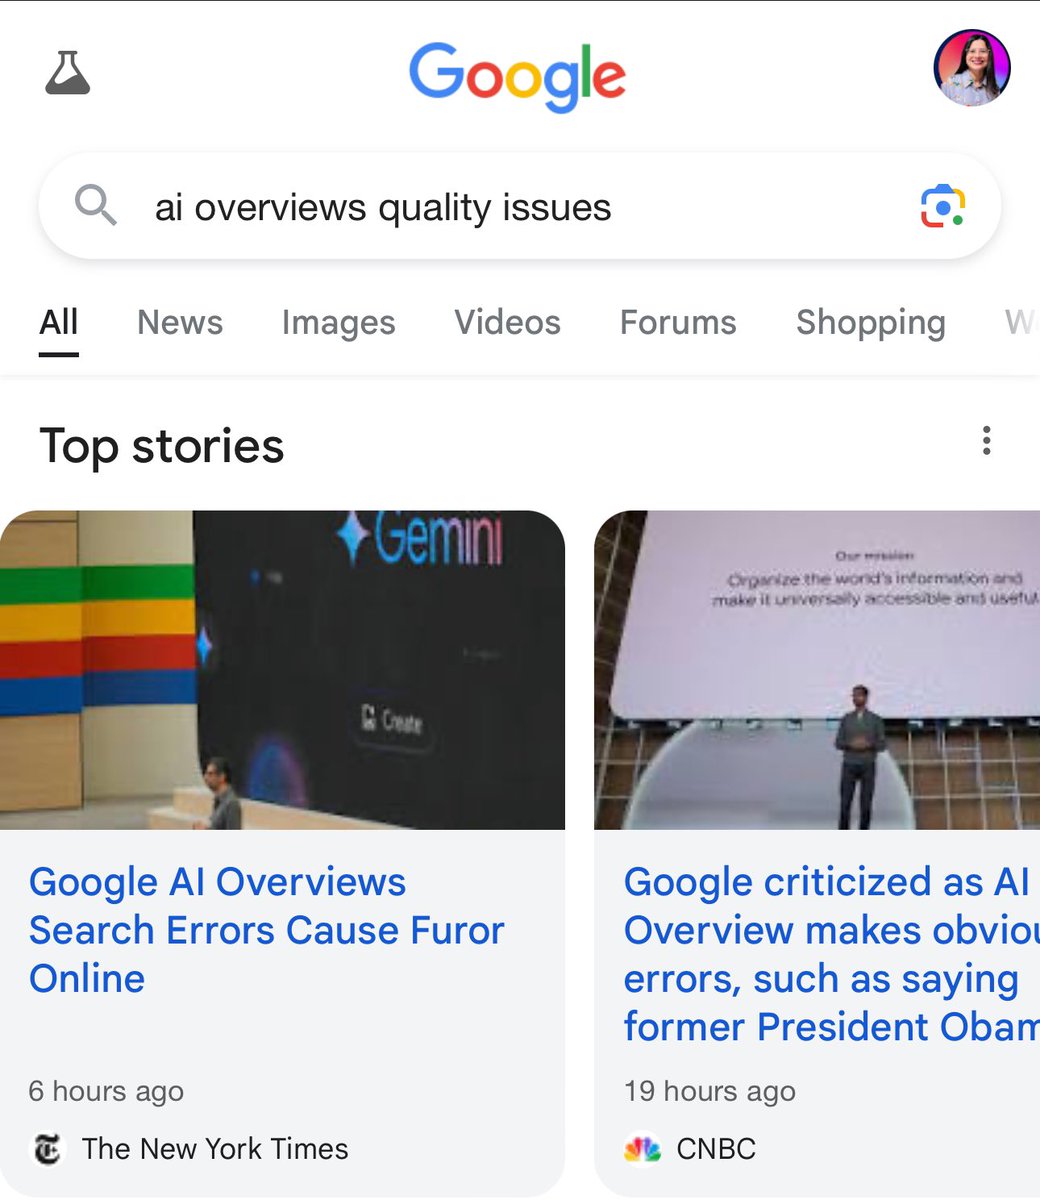 Google had a year to test the AI overviews results and here we are, major media now covering their bad quality. It seems that most of their concerns were about their monetization viability and impact rather than the quality. Now major publications are covering it. And no,